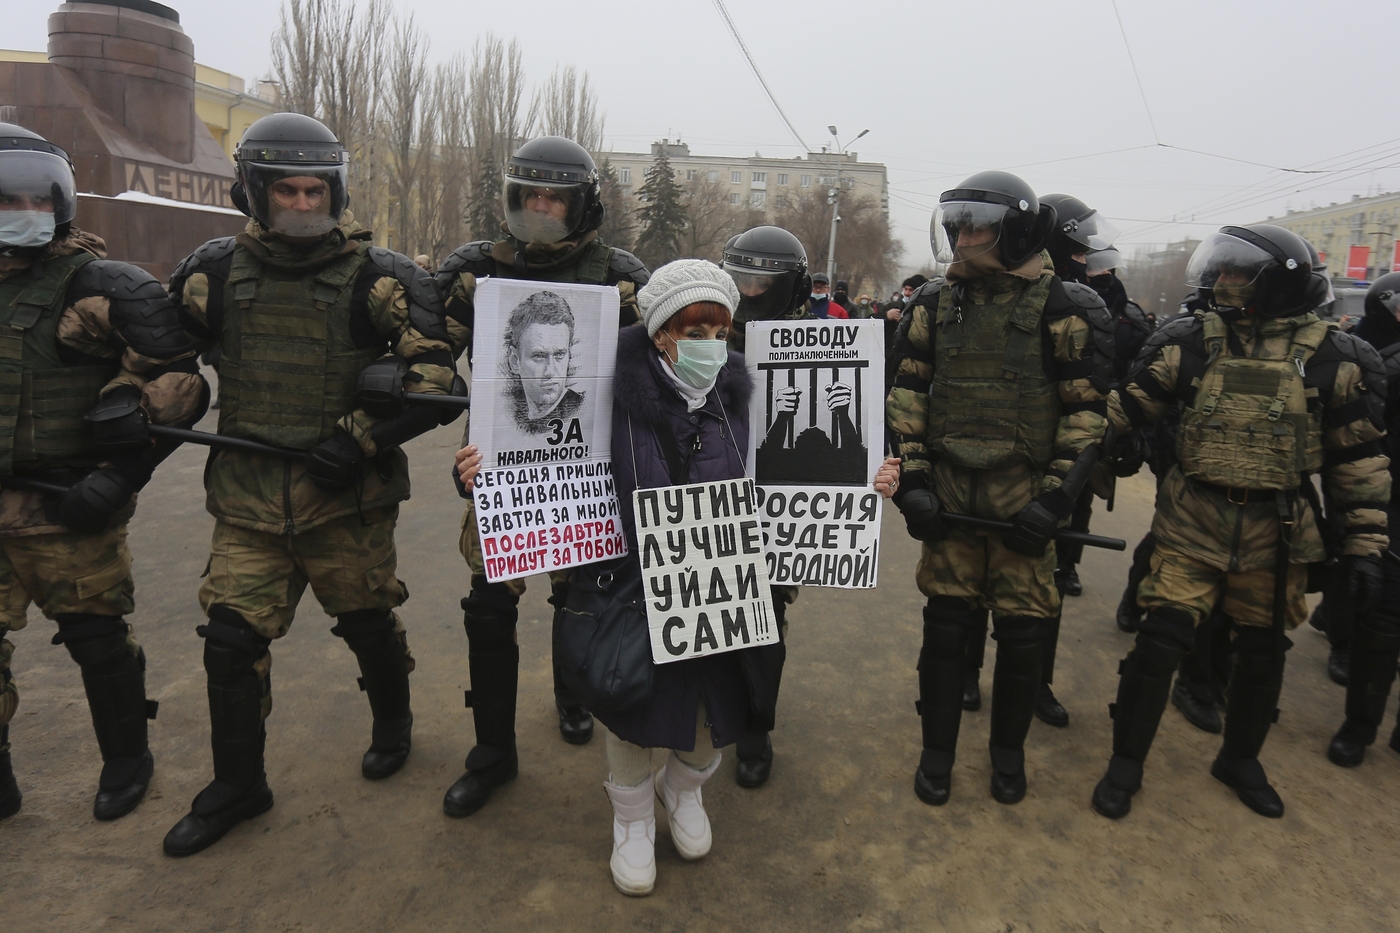 A woman holds posters as police stand blocking approaches to the square,  during a protest against the jailing of opposition leader Alexei Navalny in Volgograd, Russia, Sunday, Jan. 31, 2021. Posters, left to right, read: "Today they have come after Navalny, tomorrow they will come after me, the day after tomorrow they will come after you", "Putin, you better go away yourself", "Russia will be free". Thousands of people have taken to the streets across Russia to demand the release of jailed opposition leader Alexei Navalny, keeping up the wave of nationwide protests that have rattled the Kremlin. Hundreds have been detained by police. (AP Photo/Dmitry Rogulin)